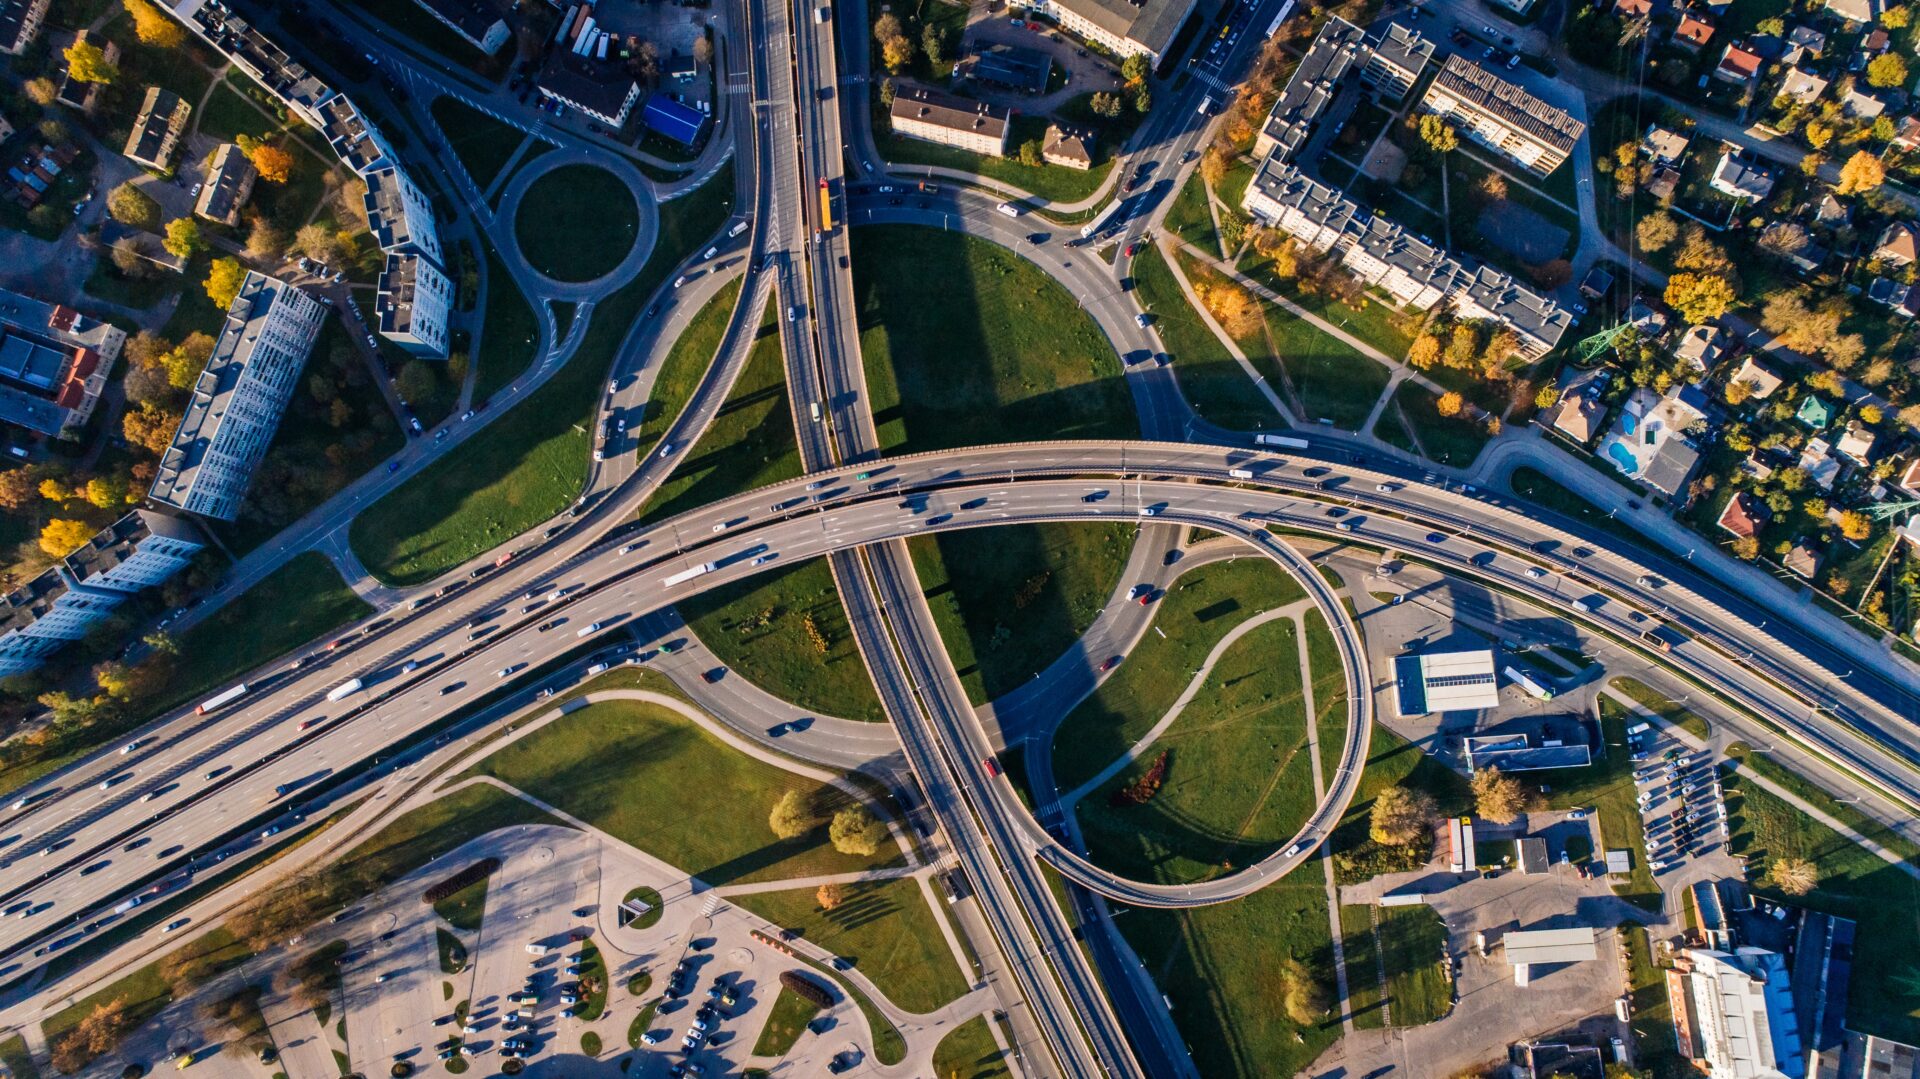 Aerial view of a multi-level highway interchange with traffic.